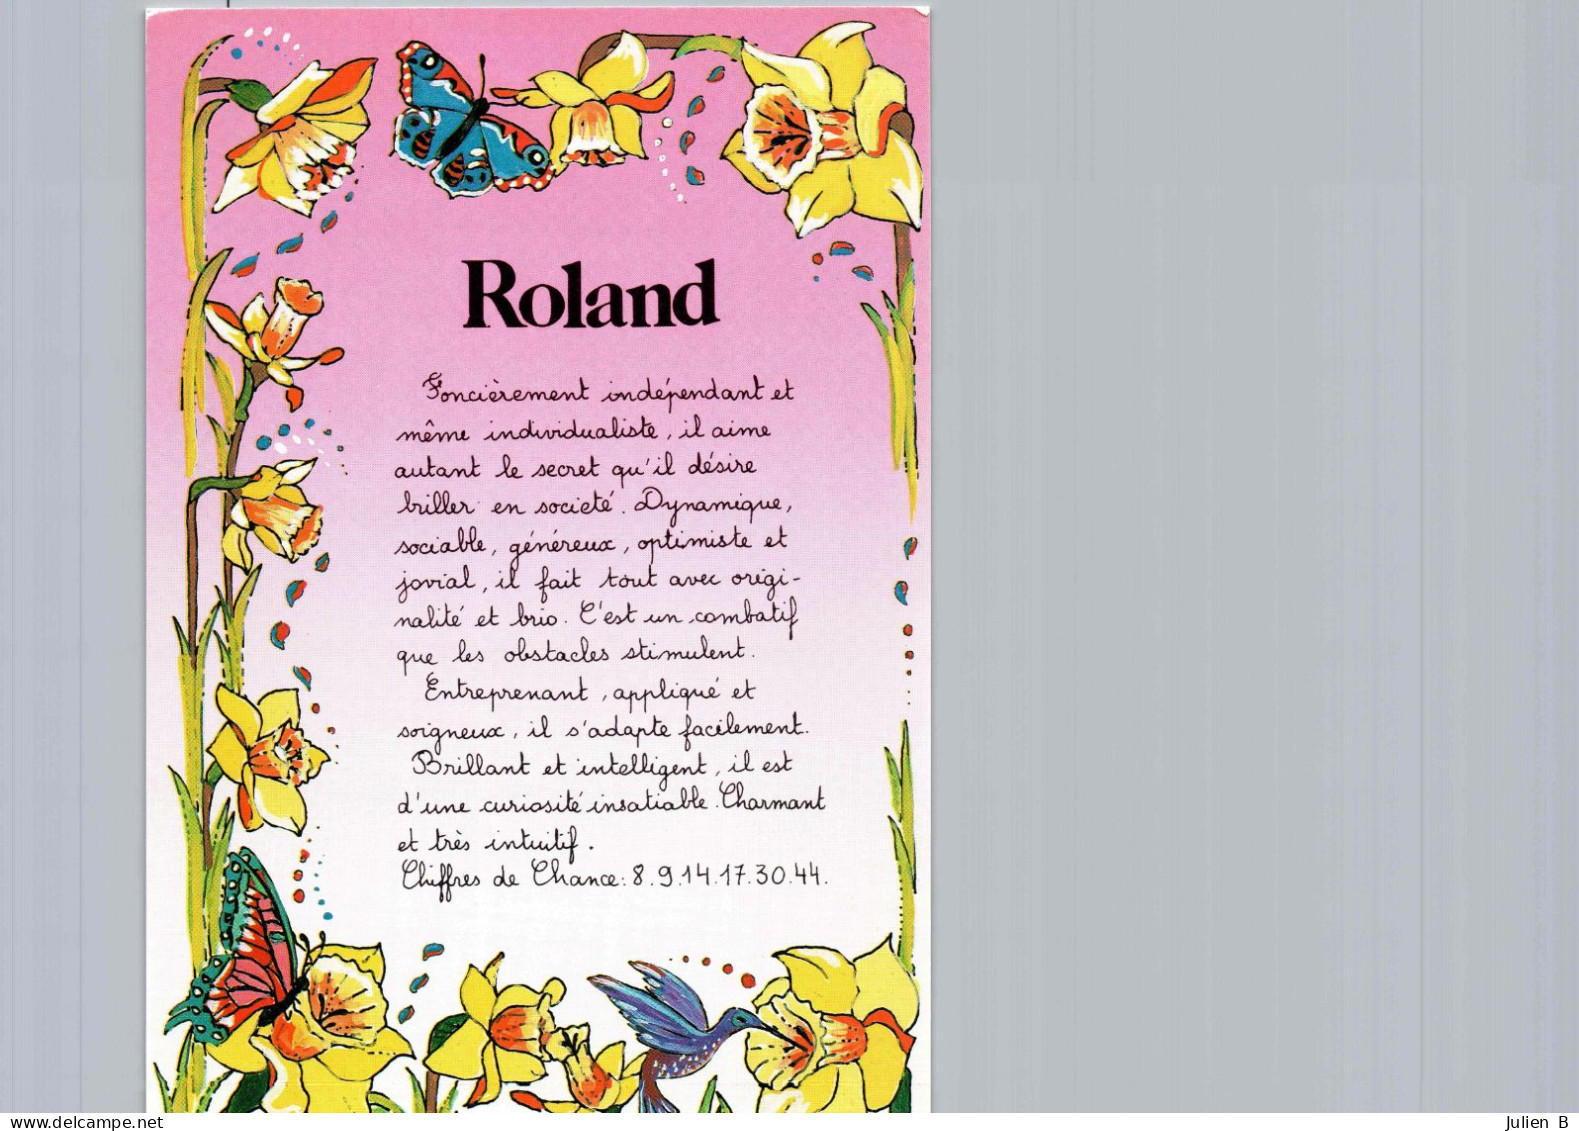 Roland, Edition André Barthelemy - Nombres